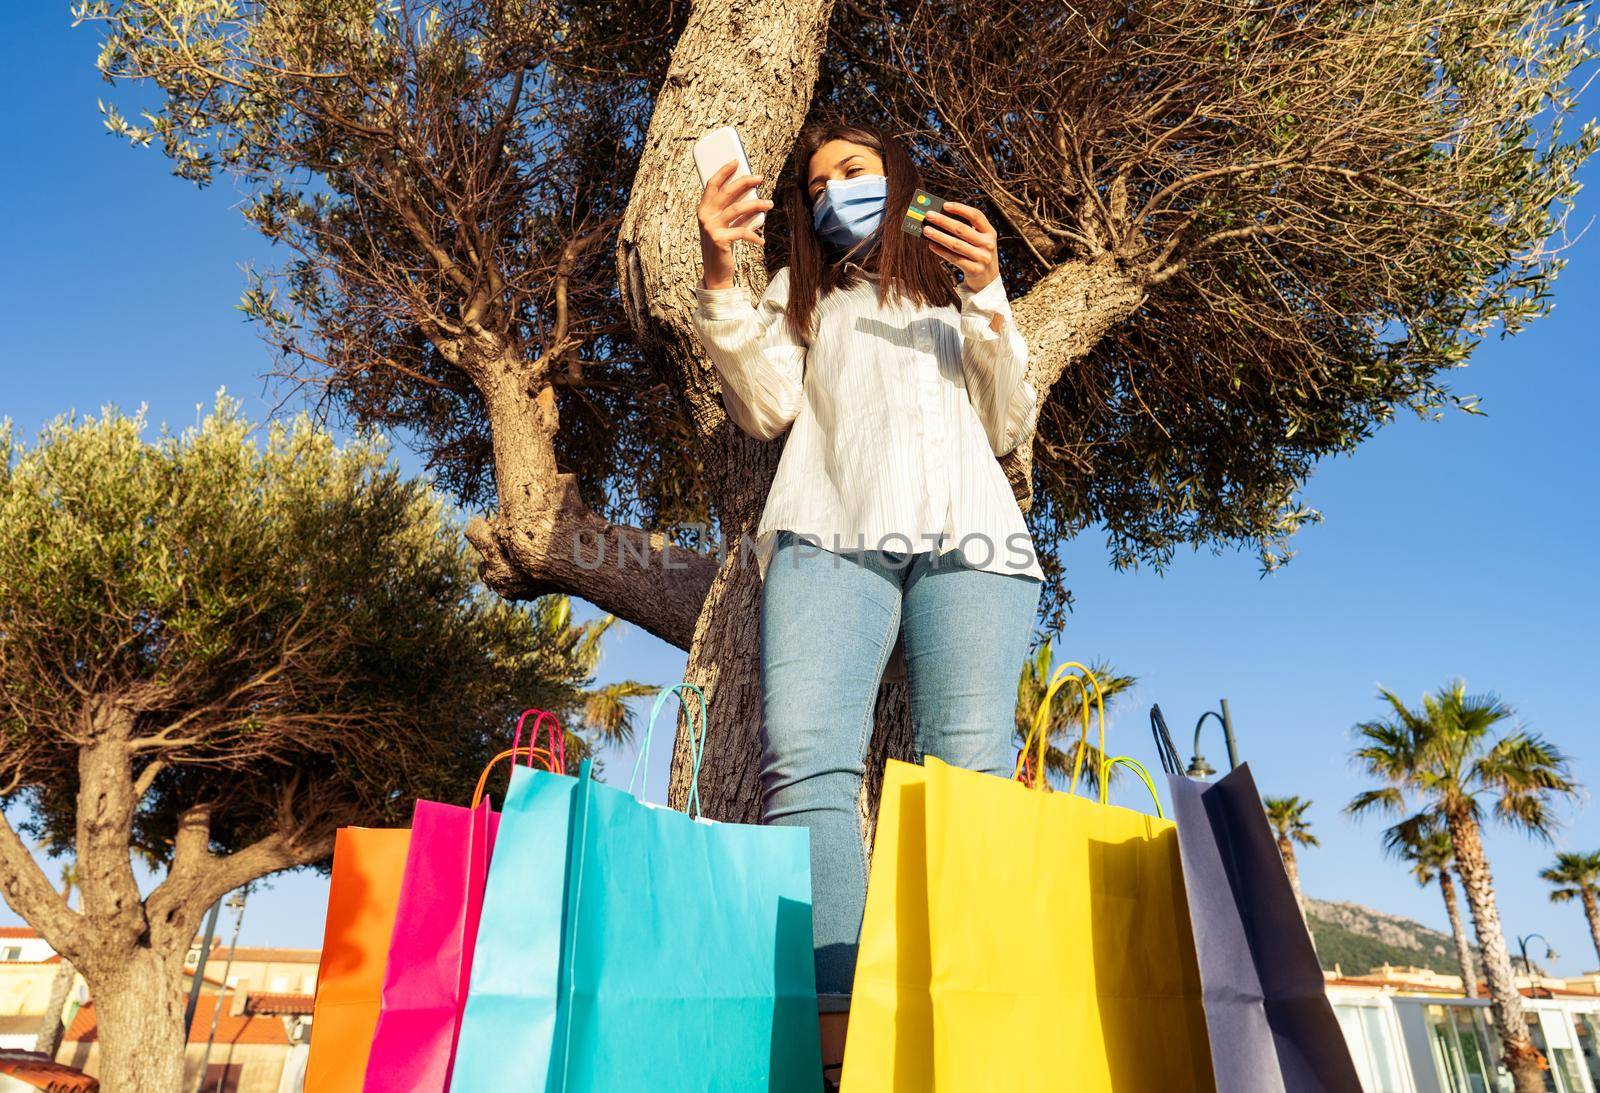 Lonely girl having fun in city park taking a break from a day of shopping using smartphone for new online credit card purchases. Young woman in Covid-19 protective face mask among many colored bags by robbyfontanesi